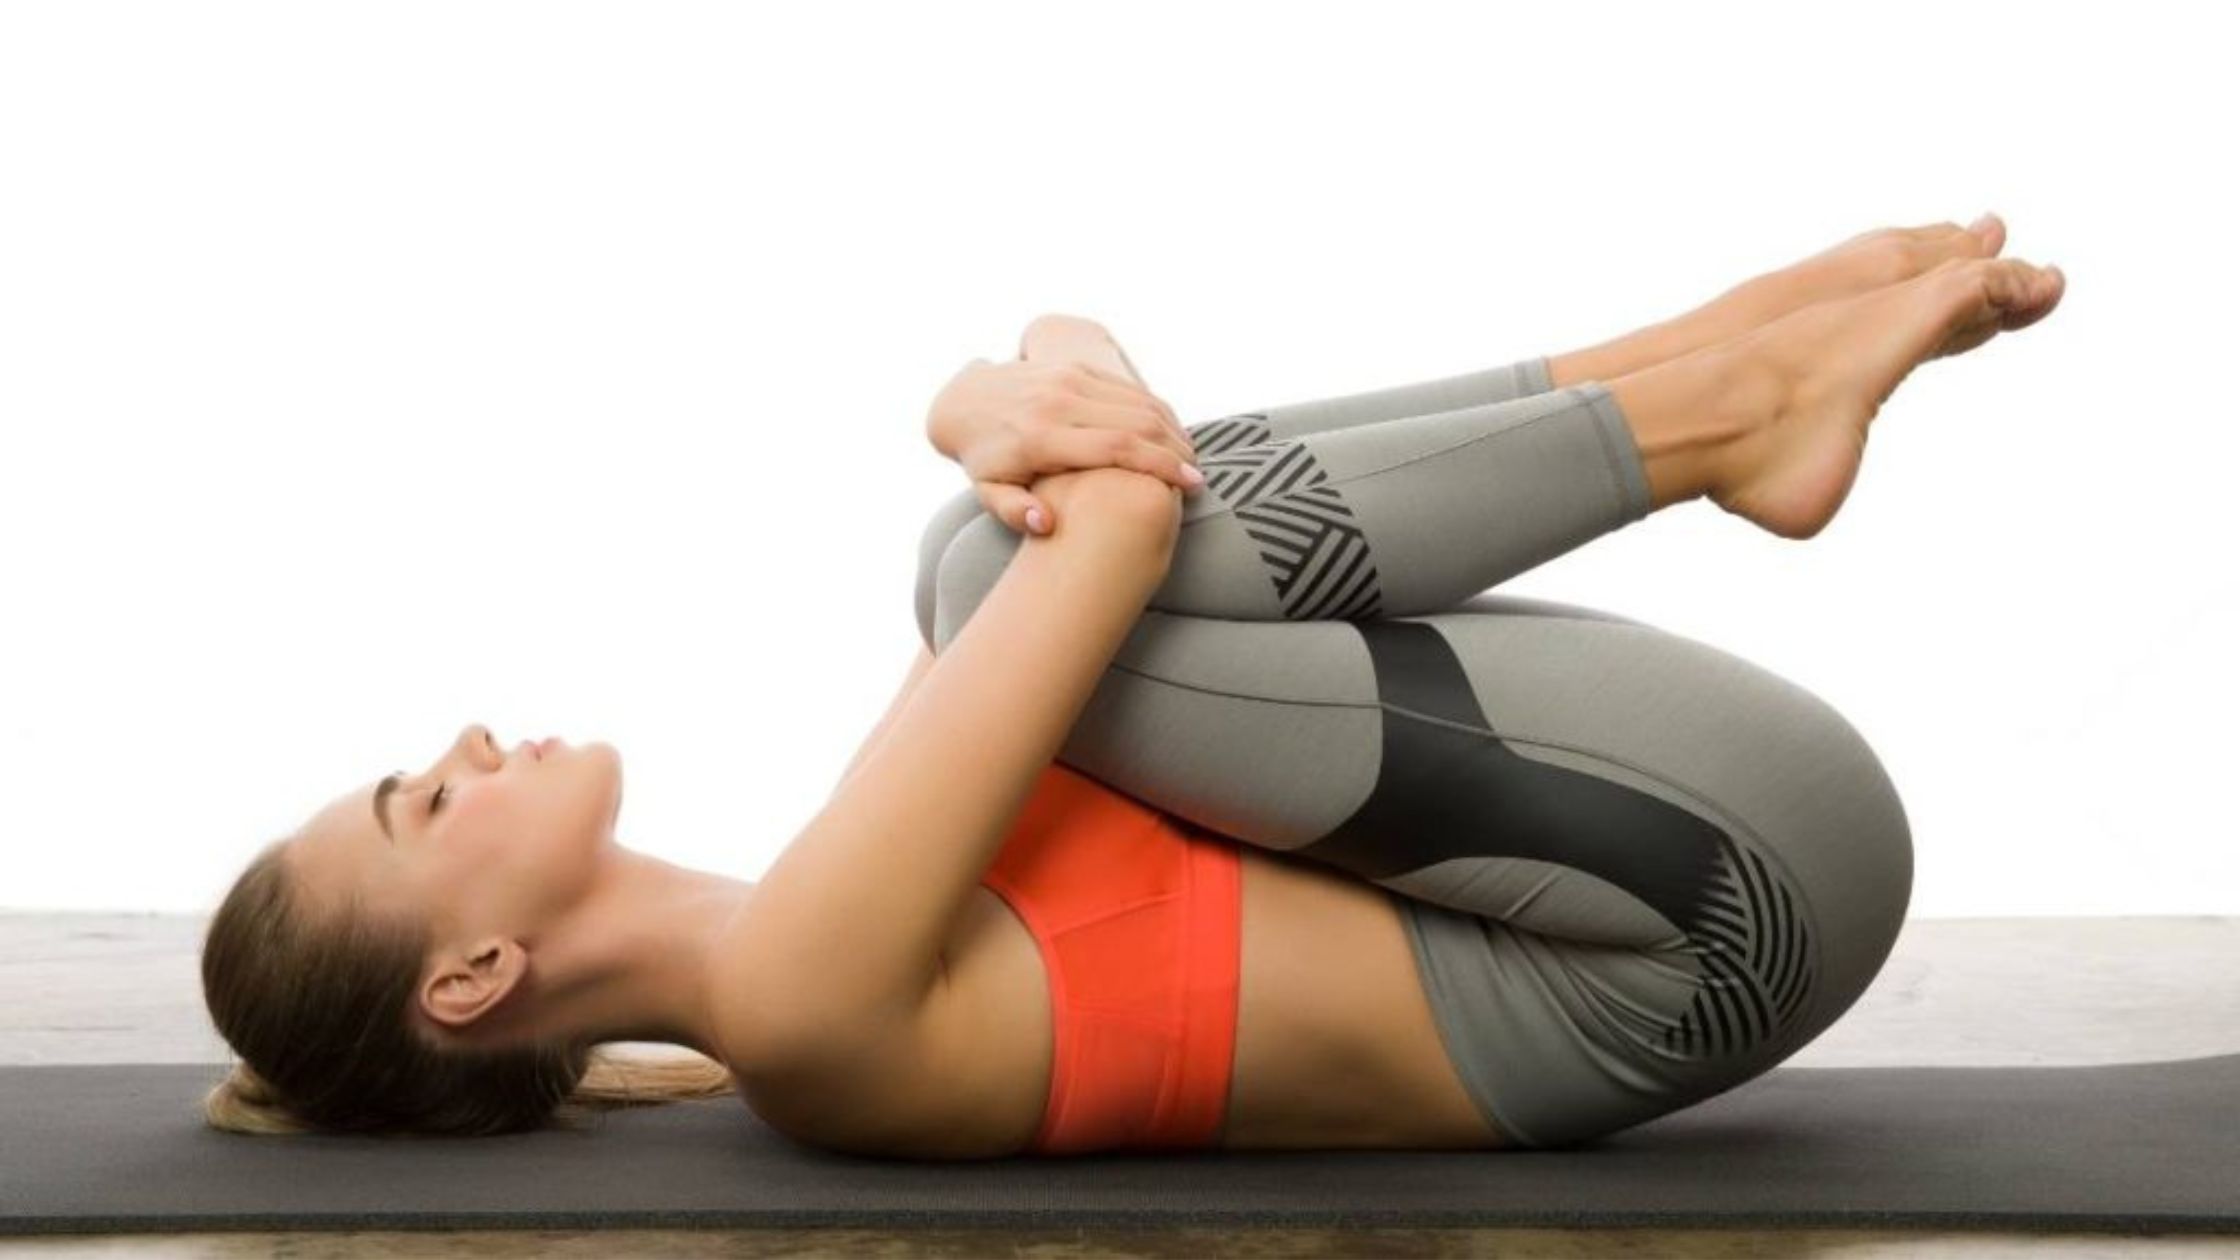 7 Yoga Poses & Positions to Help Ease Menstrual Cramps | Lunette USA